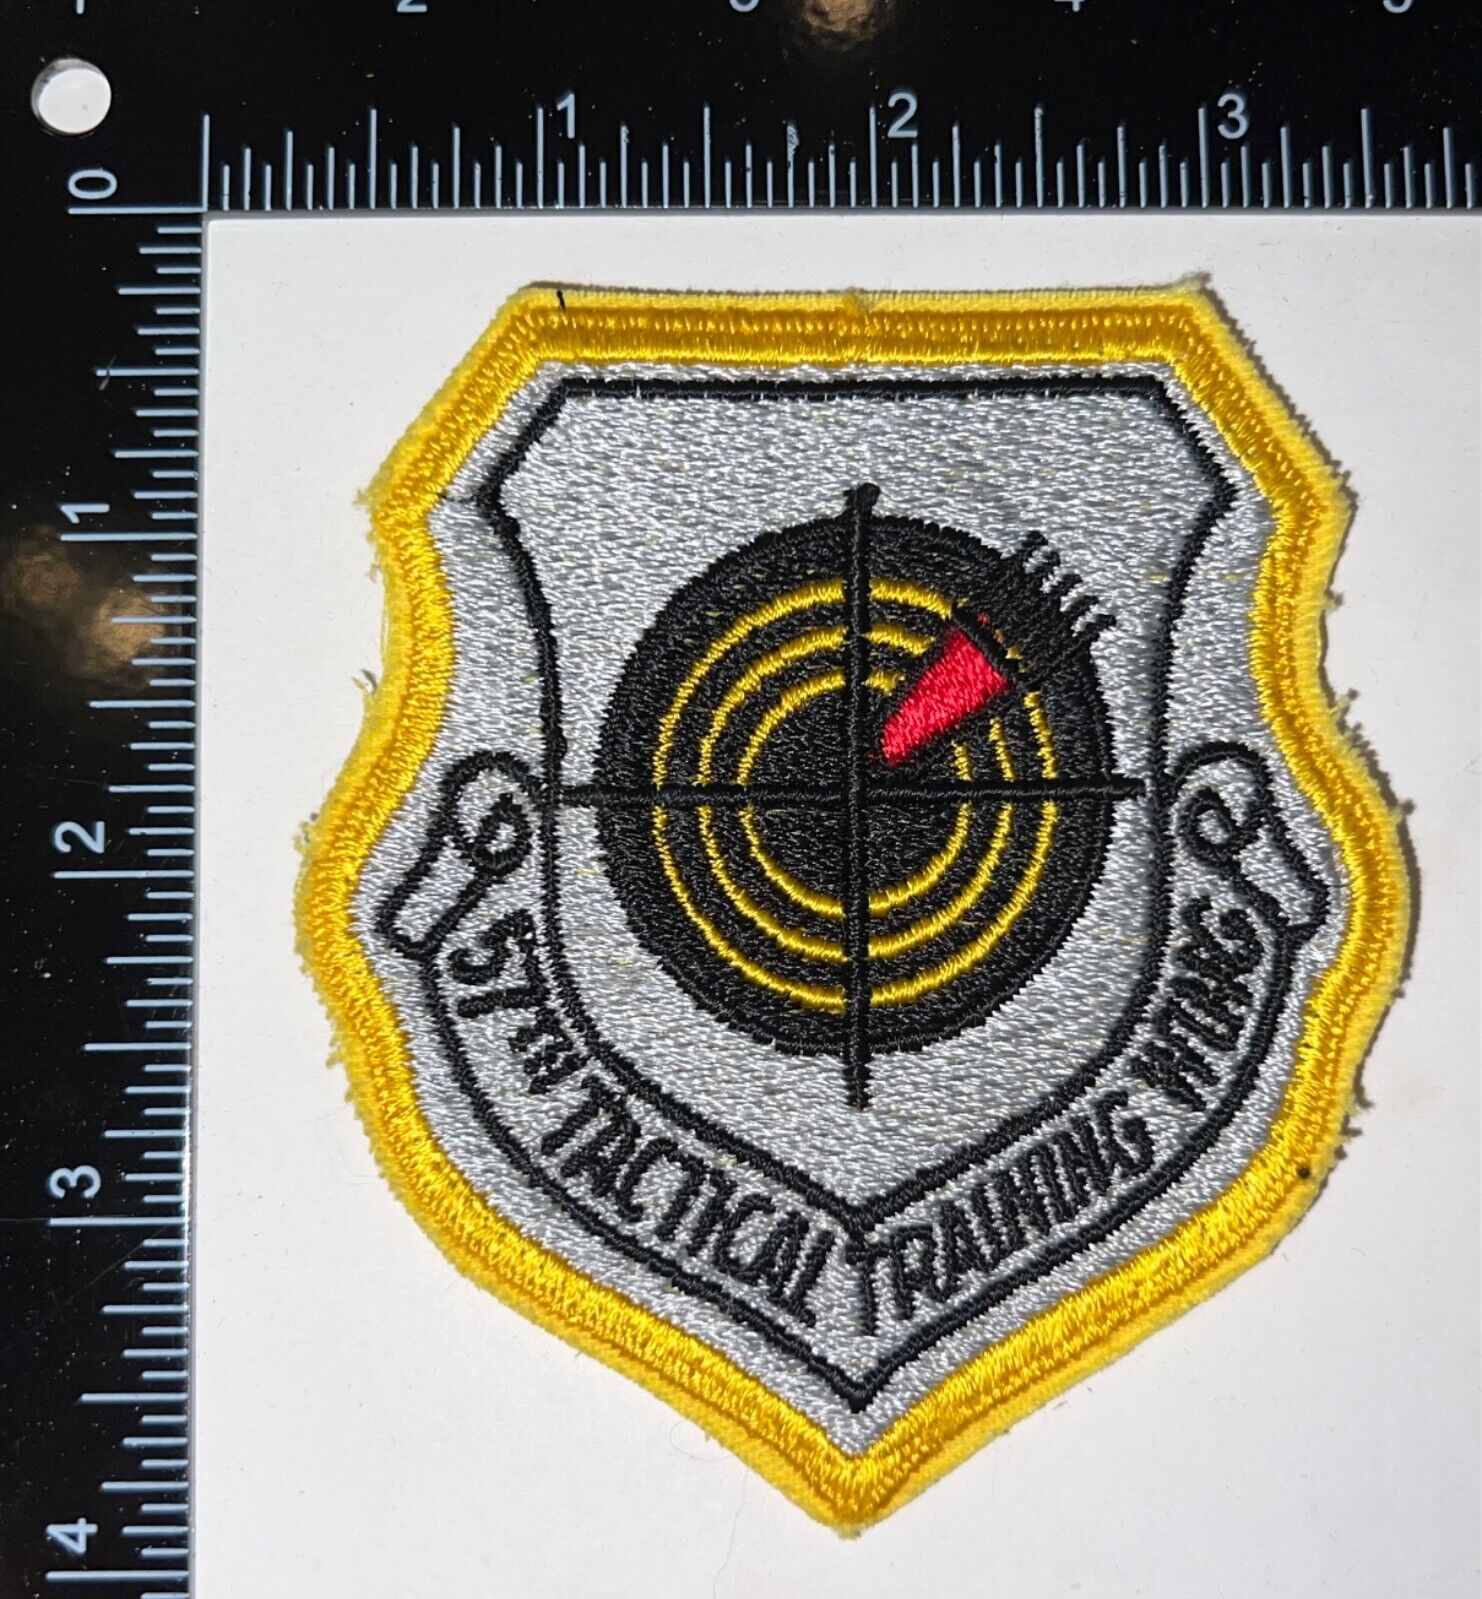 USAF US Air Force 57th Tactical Training Wing Patch